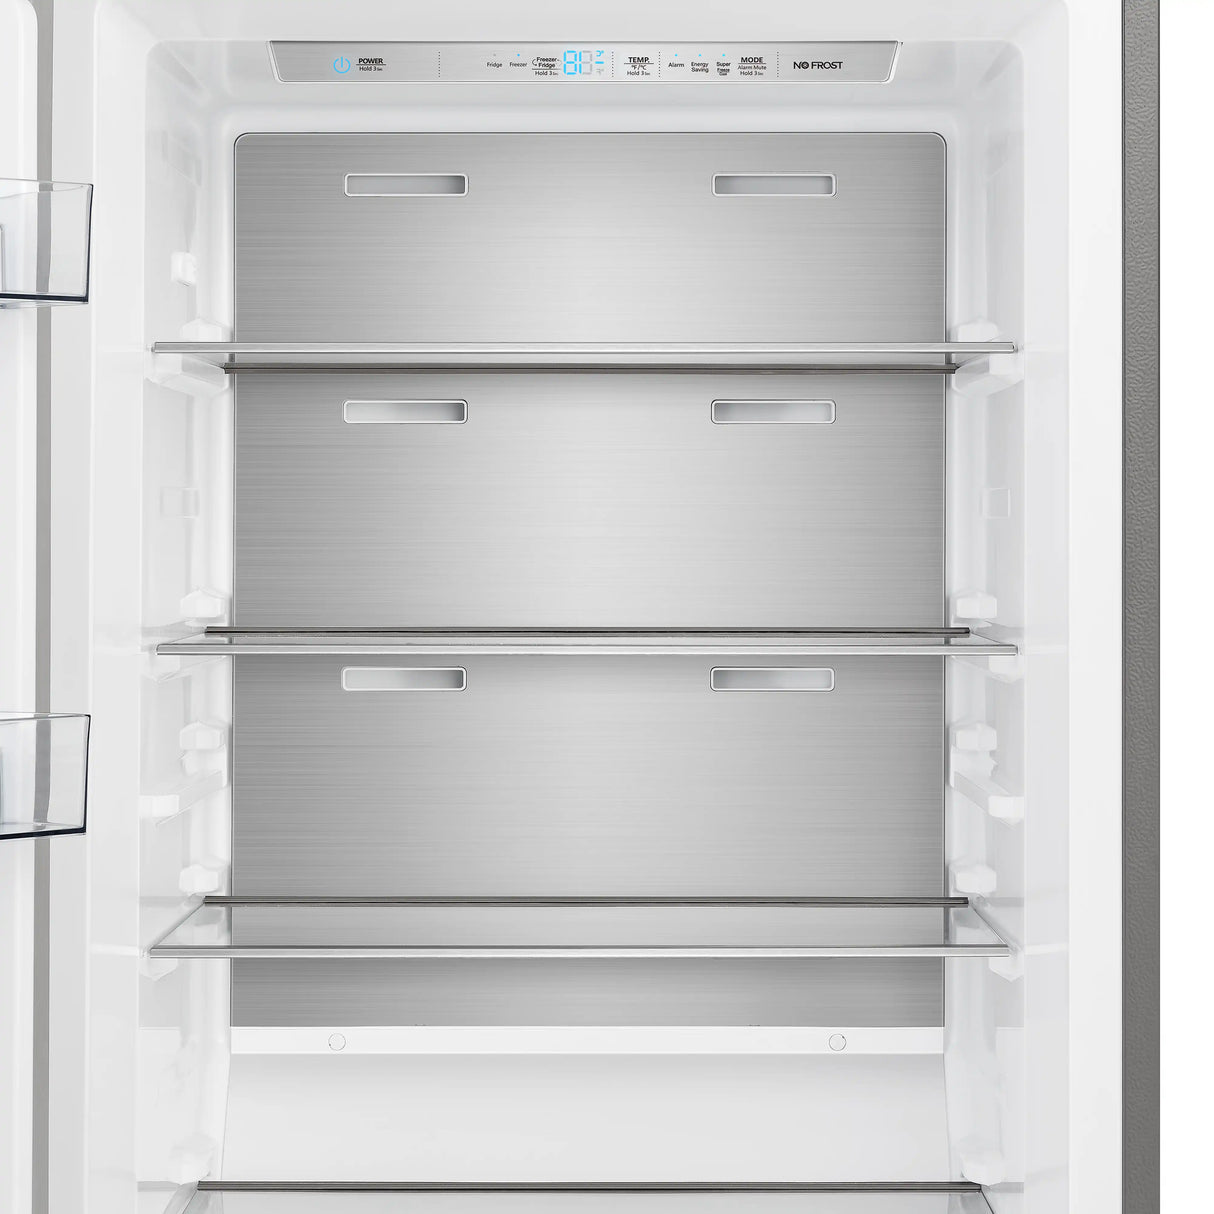 Forno Maderno 28-Inch Convertible Built-In Refrigerator/Freezer with 4-Inch Decorative Grill Trim, 13.6 cu.ft., Left Hinge in Stainless Steel (FFFFD1722-32LS)